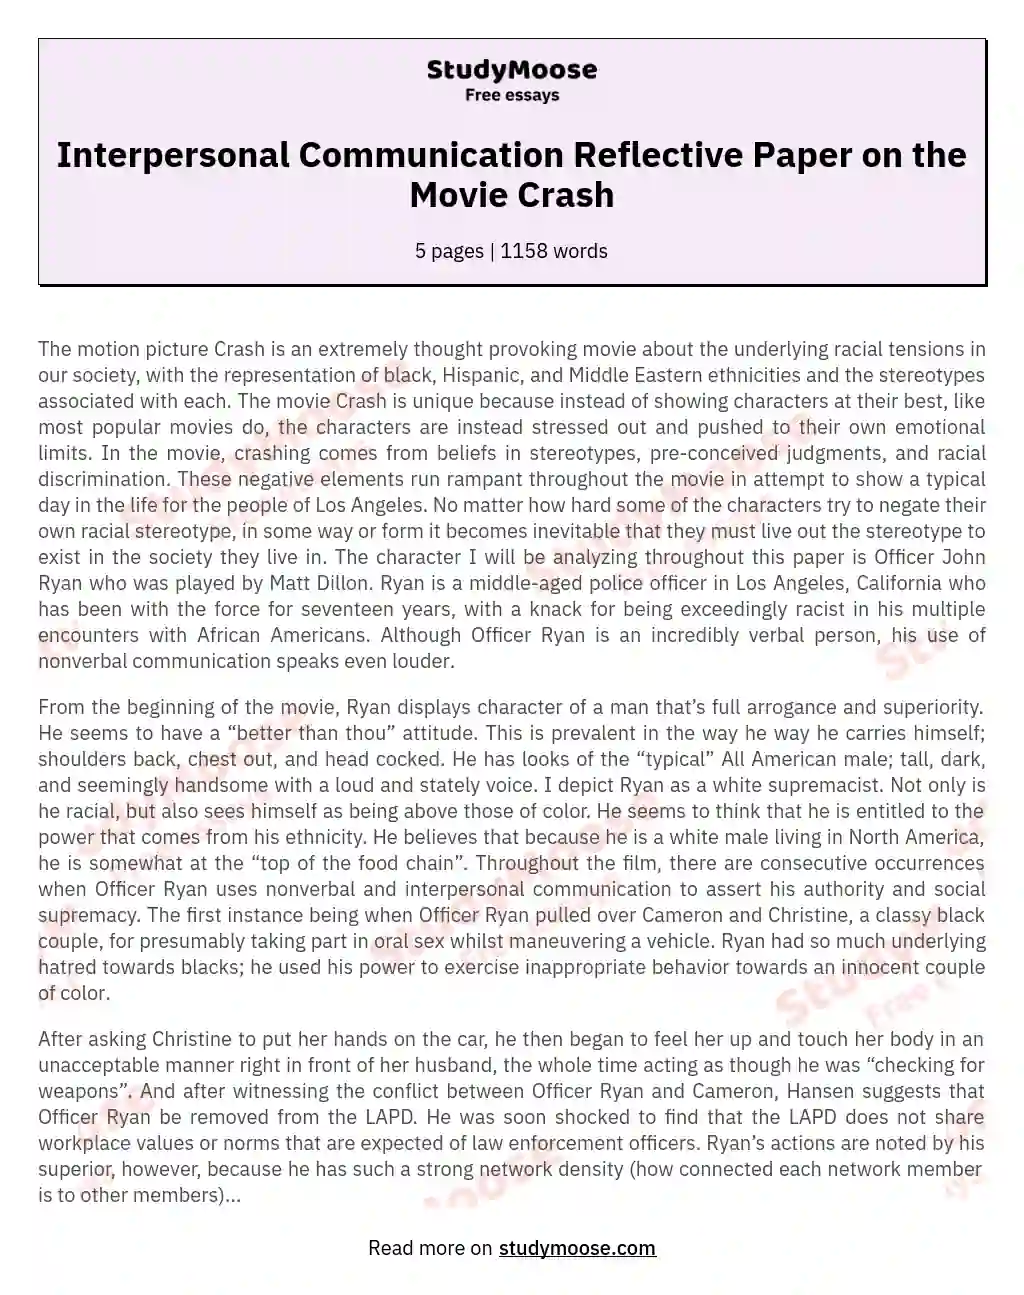 Interpersonal Communication Reflective Paper on the Movie Crash